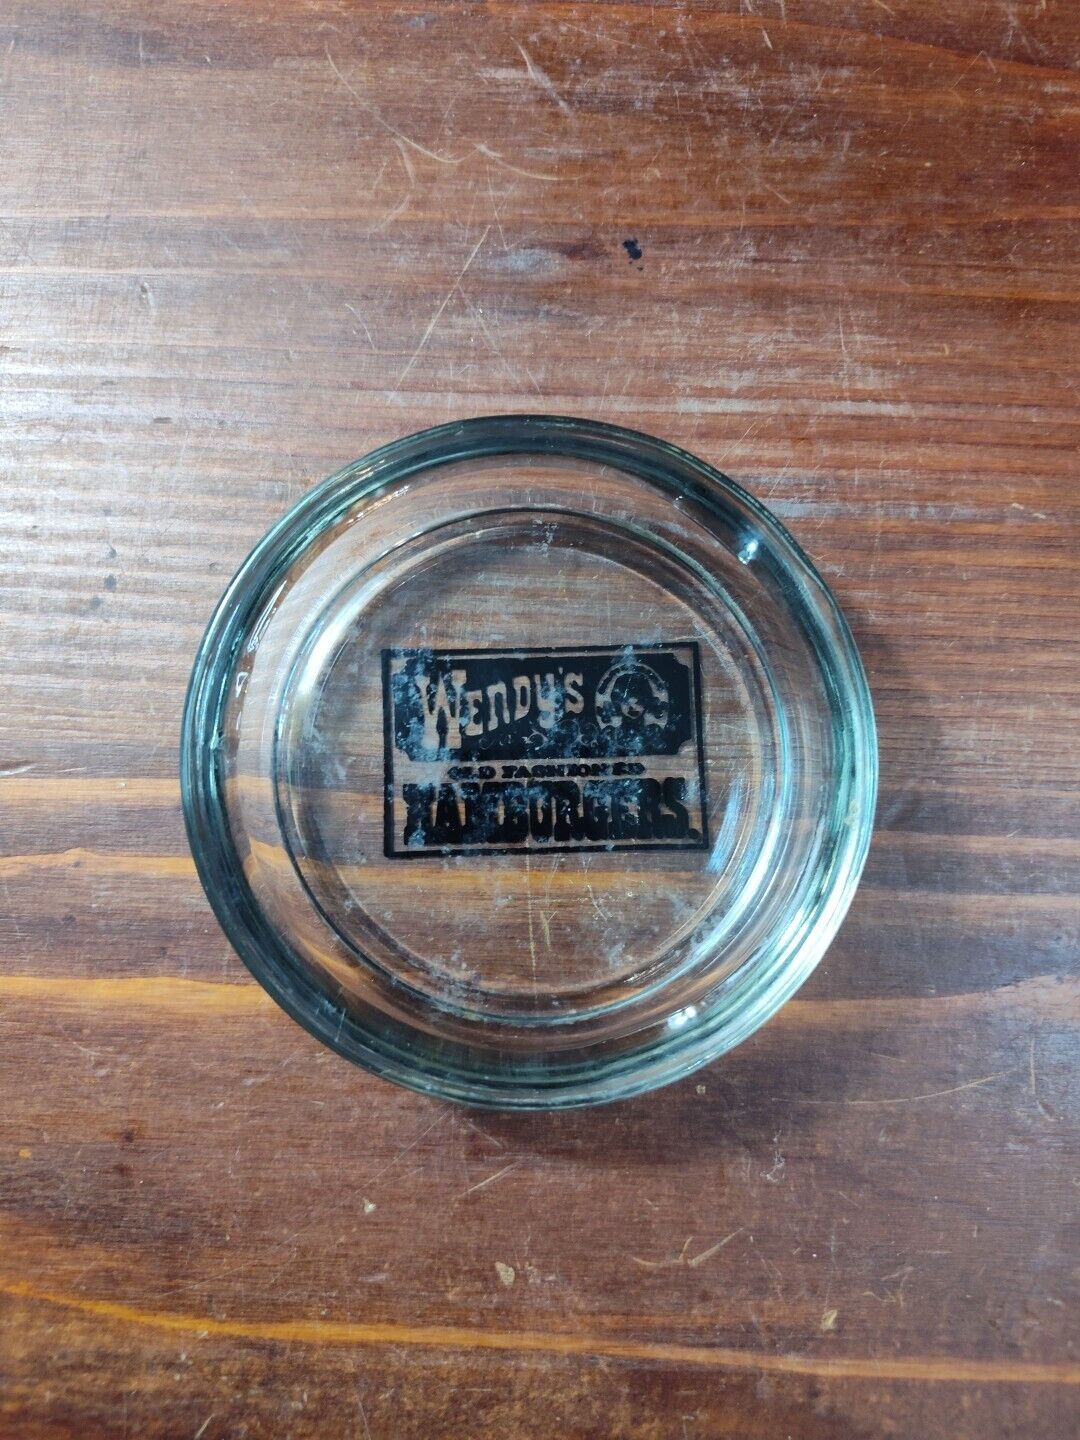 Vintage Wendy's Old Fashioned Hamburgers Restaurant Ashtray Clear Glass, 1980s